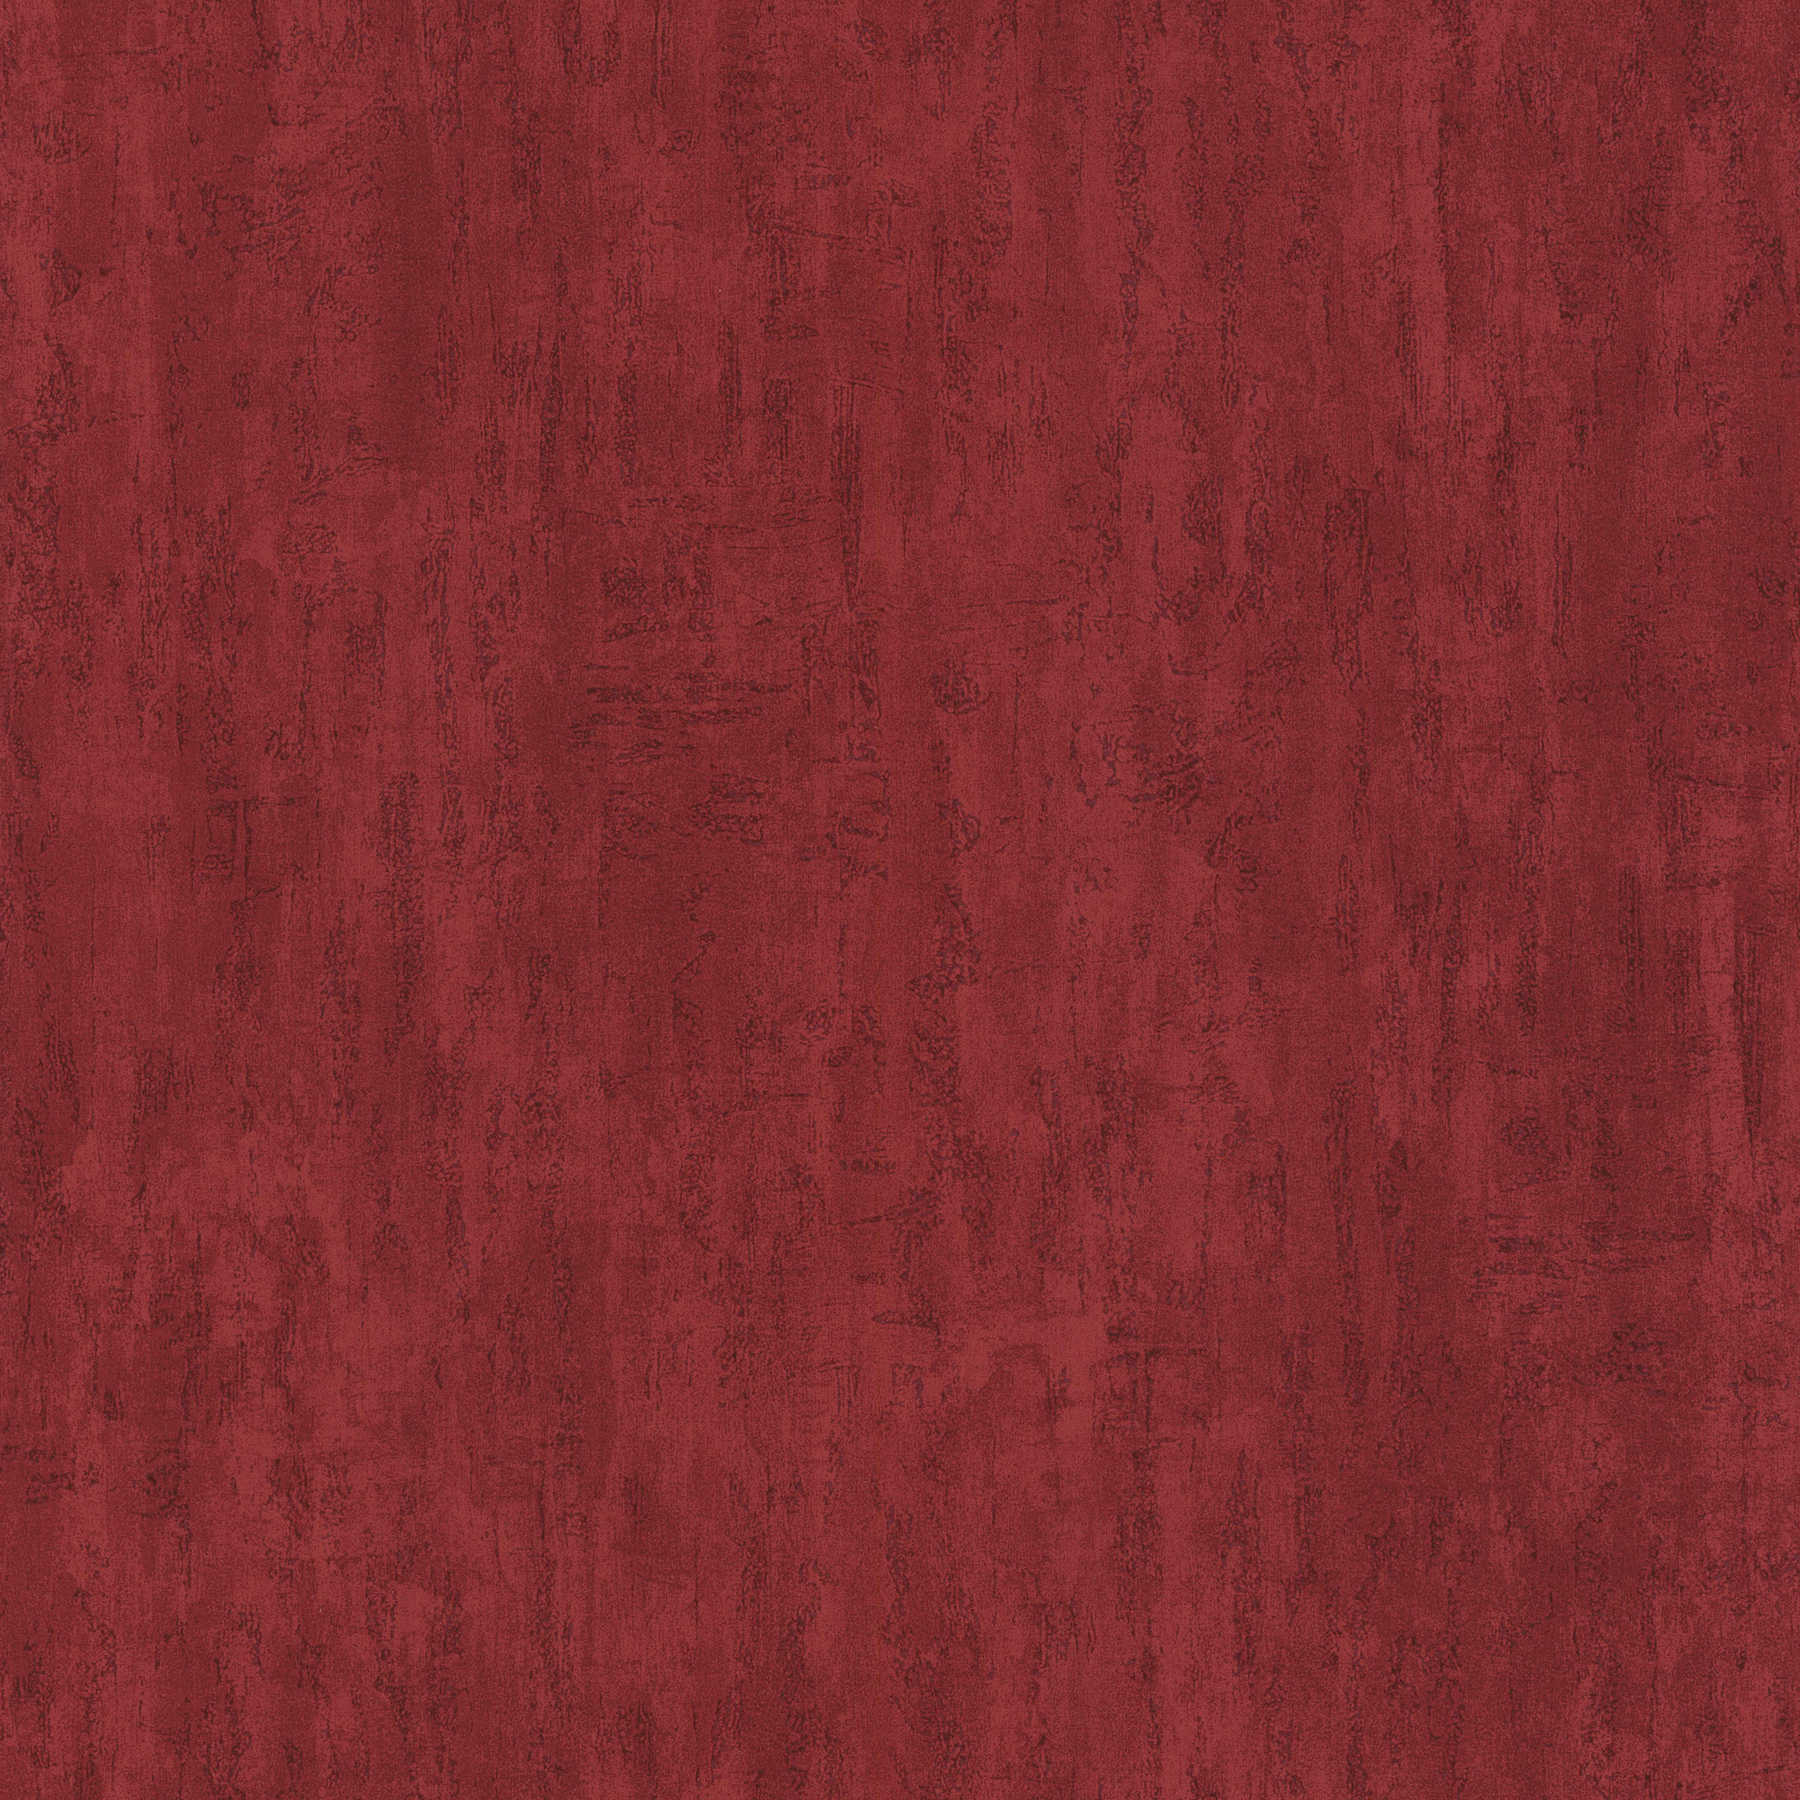 Wine red non-woven wallpaper with textured pattern - red
